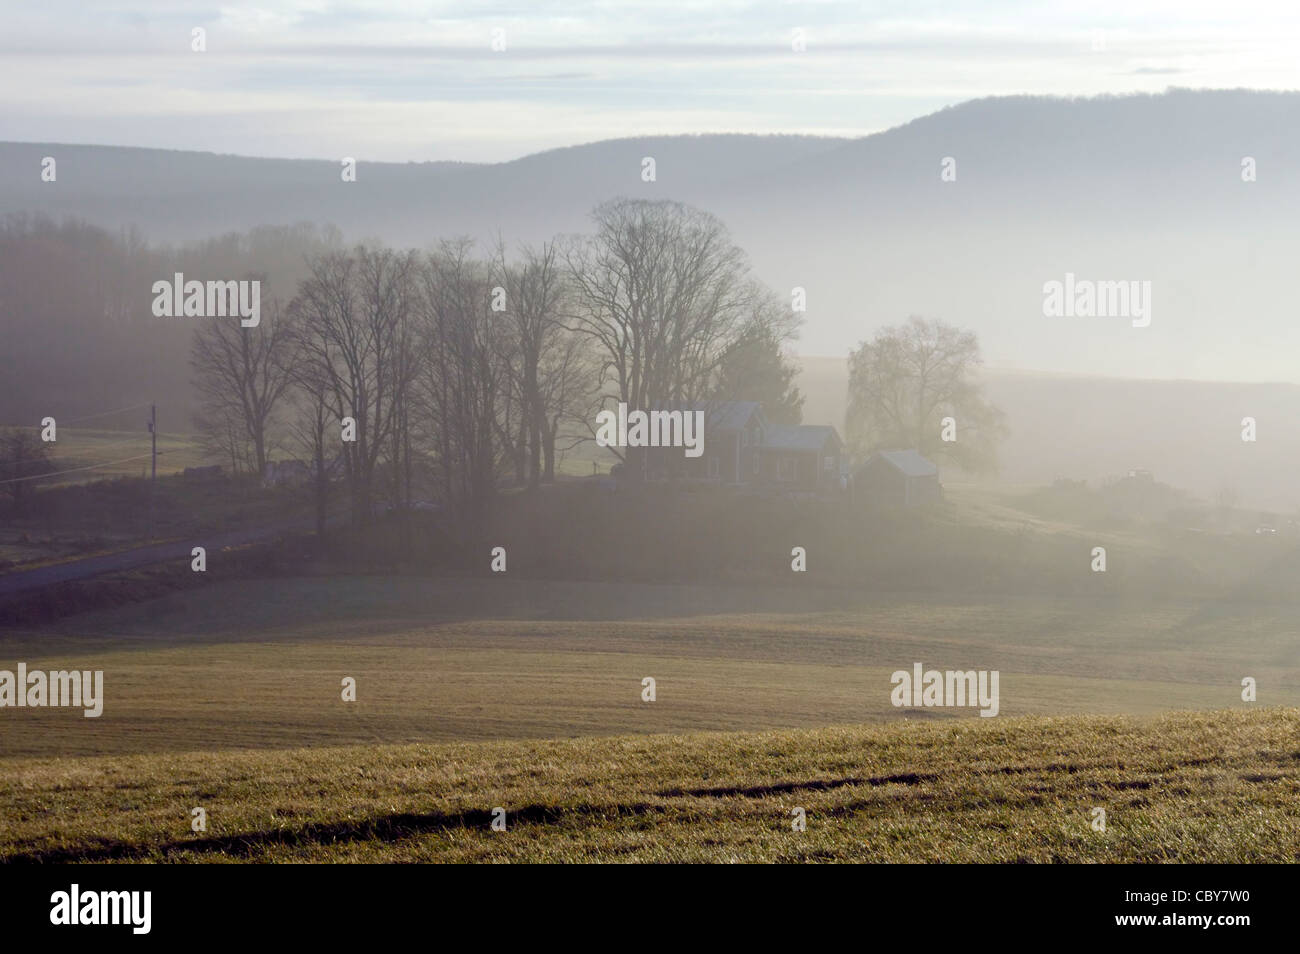 A house on a hill in fog Stock Photo